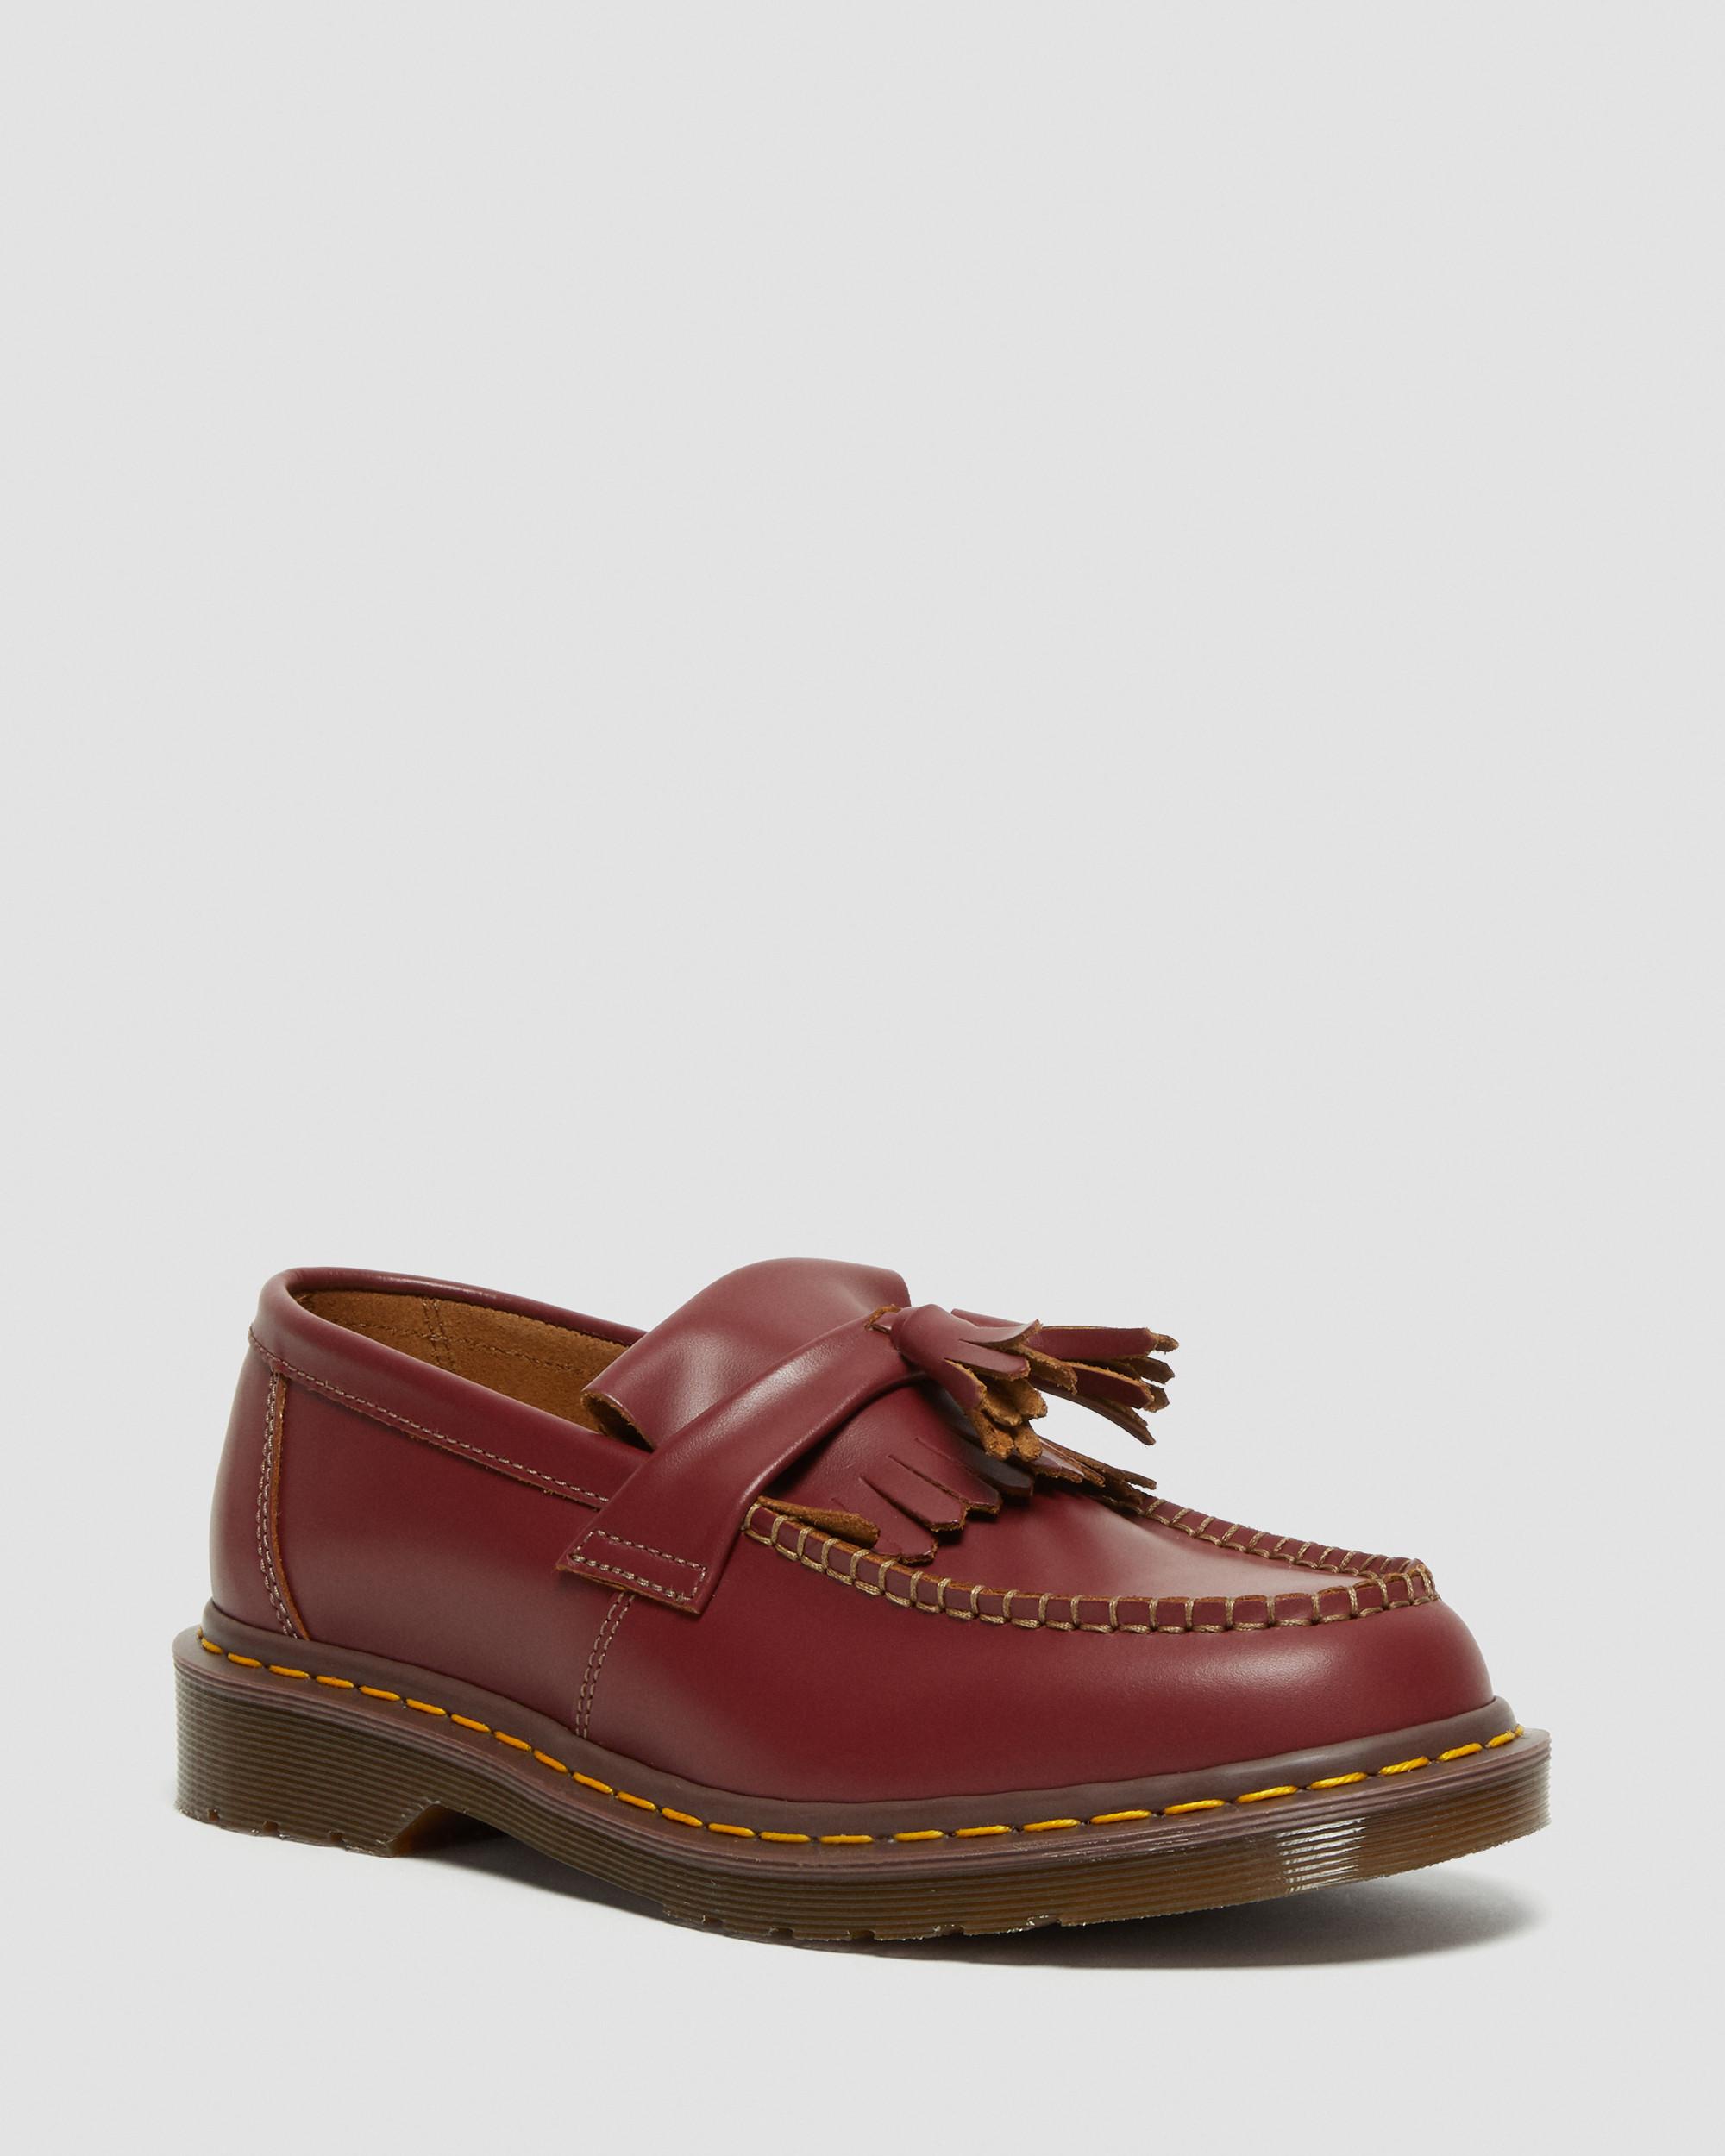 Adrian Made in England Quilon Leather Tassel Loafers in Red | Dr. Martens